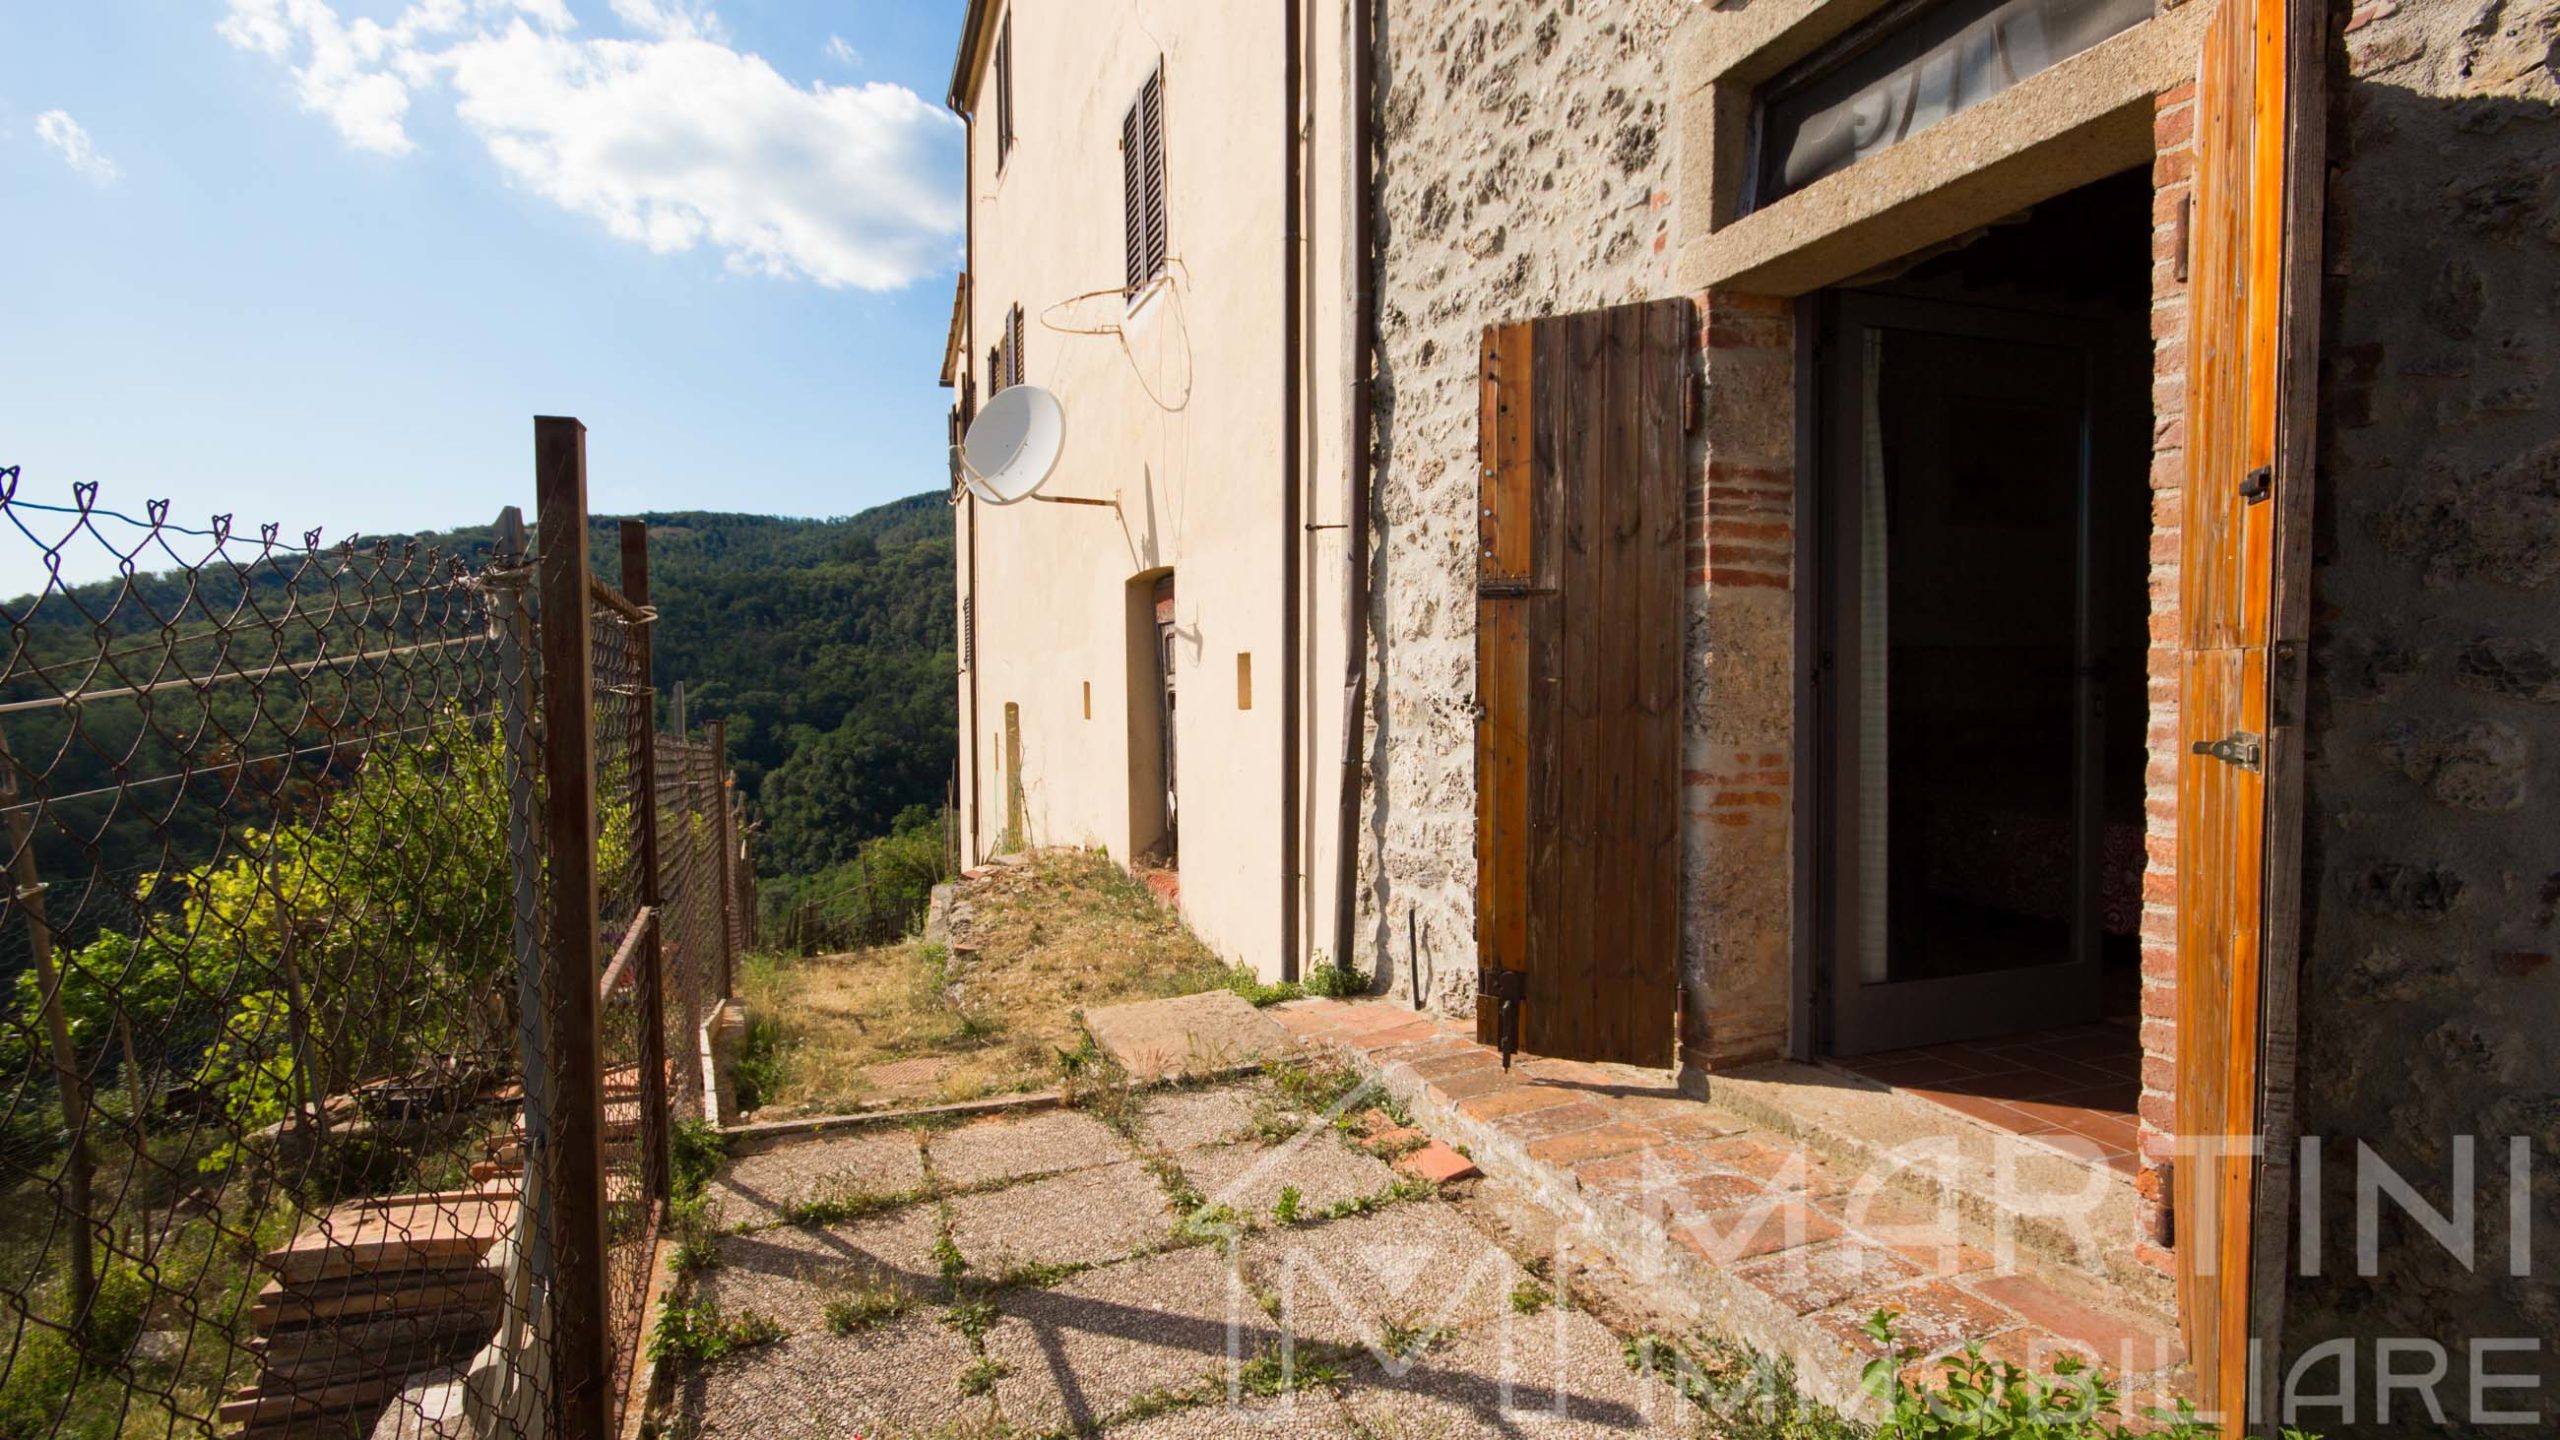 Rustic House For Sale in Tuscany – Amazing View